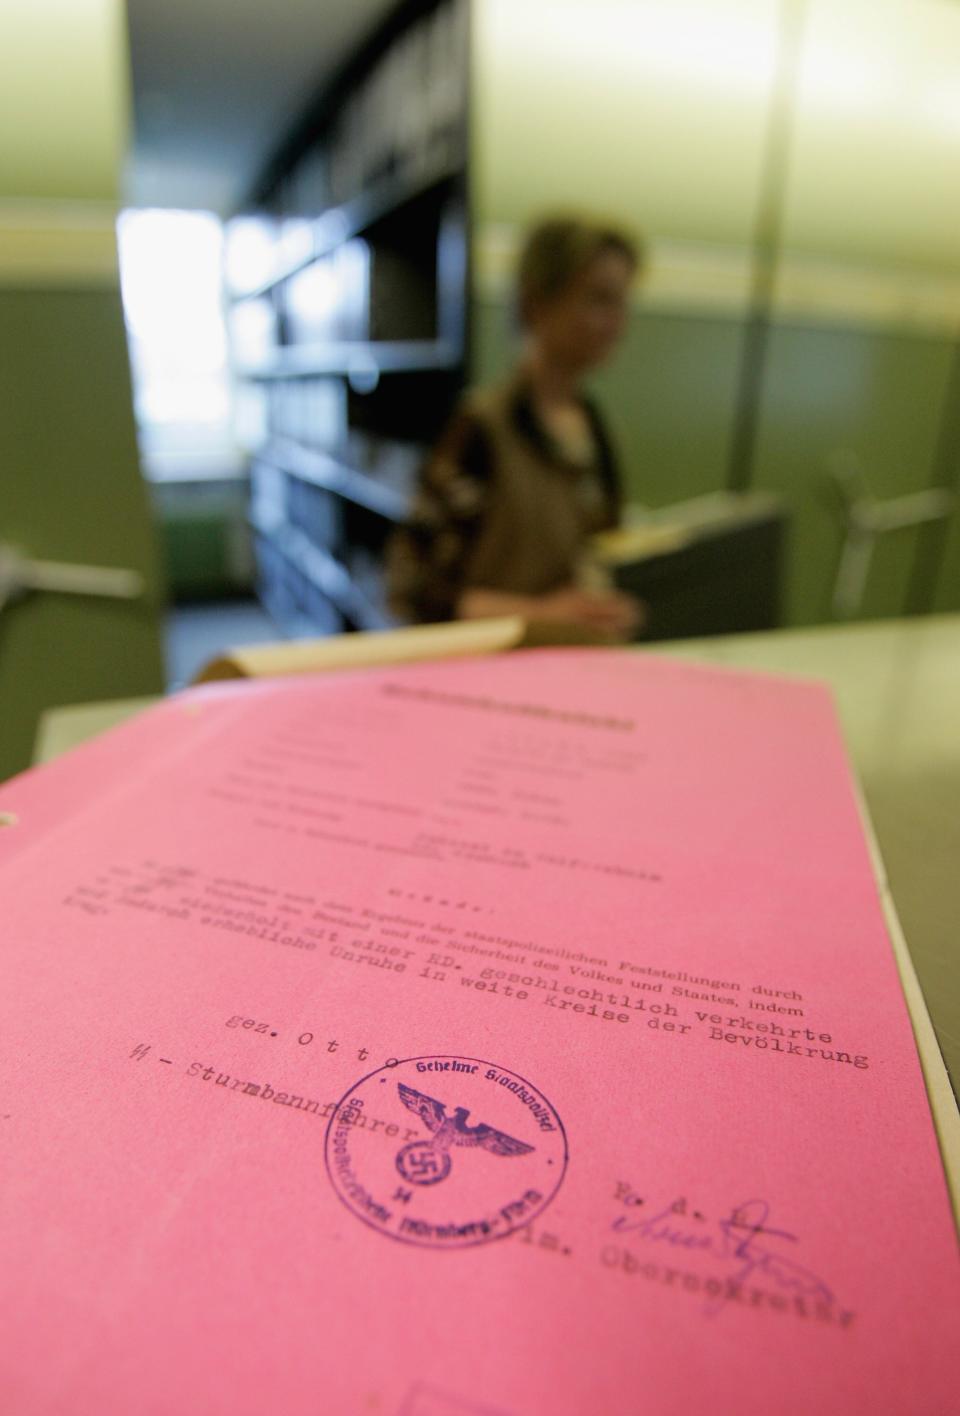 A document of the secret state police of the nazi-regime, Gestapo, is pictured at the ITS (International Tracing Service) Holocaust Archive on April 28, 2006 in Bad Arolsen, Germany. (Photo by Ralph Orlowski/Getty Images)